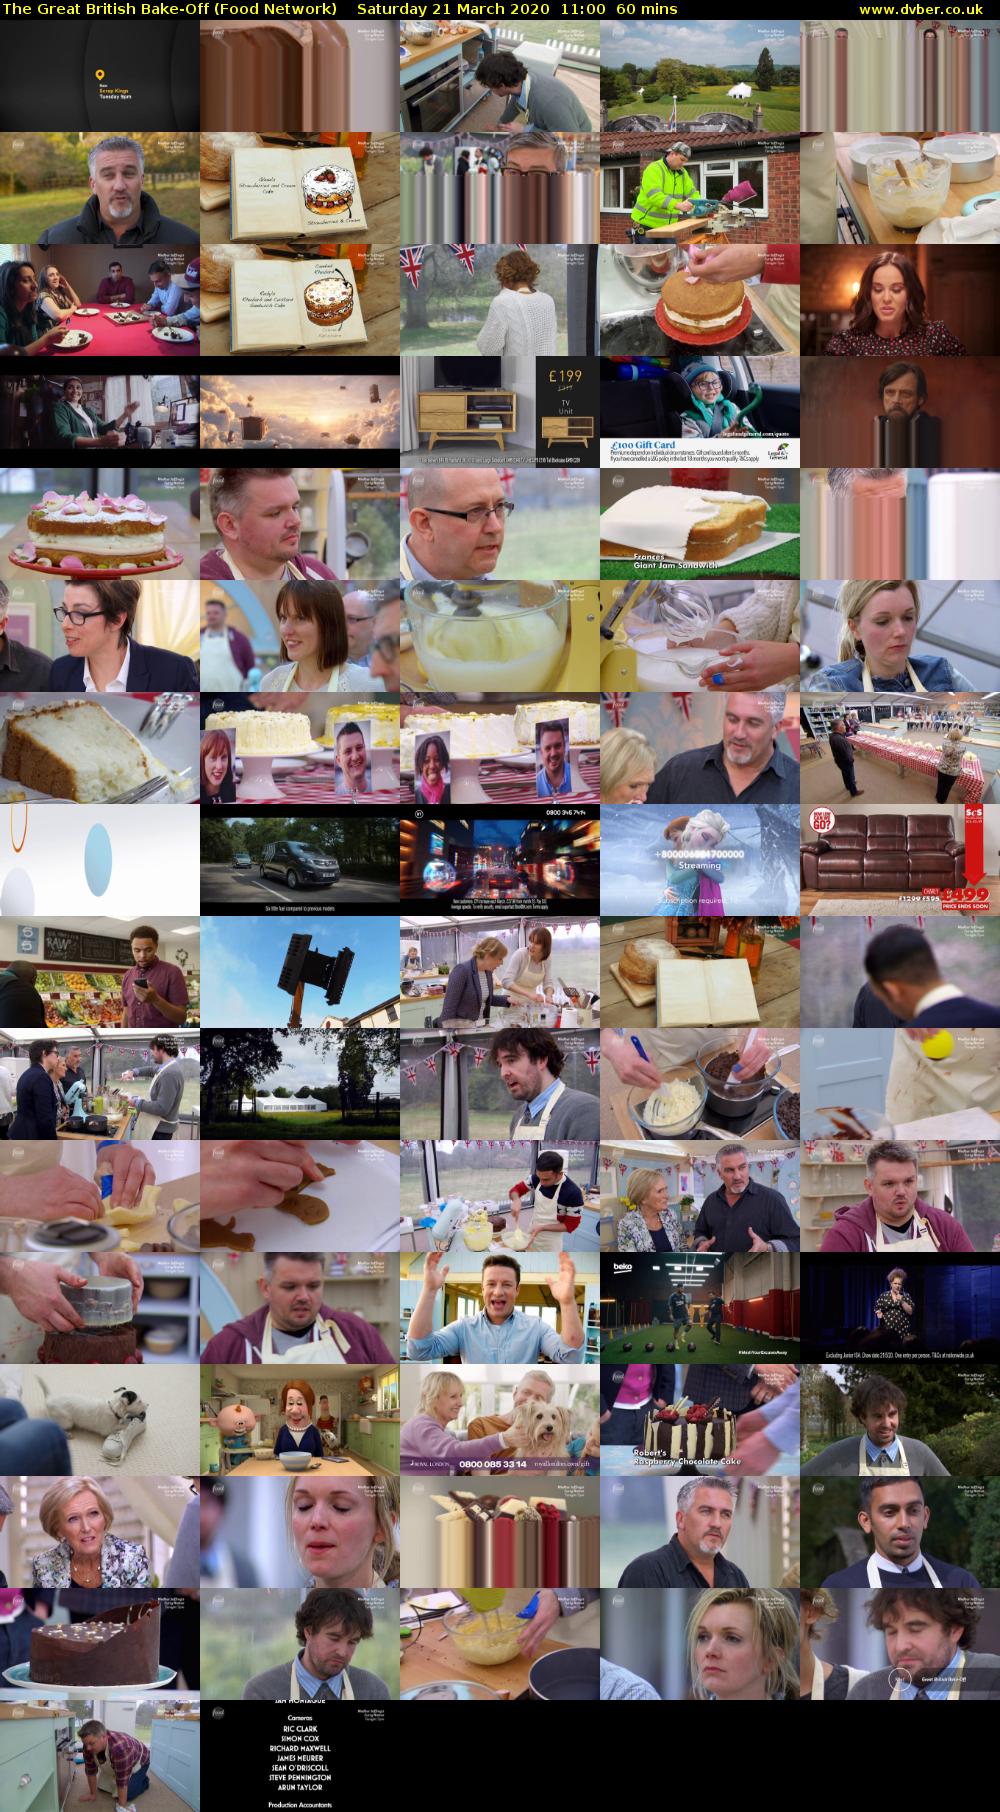 The Great British Bake-Off (Food Network) Saturday 21 March 2020 11:00 - 12:00